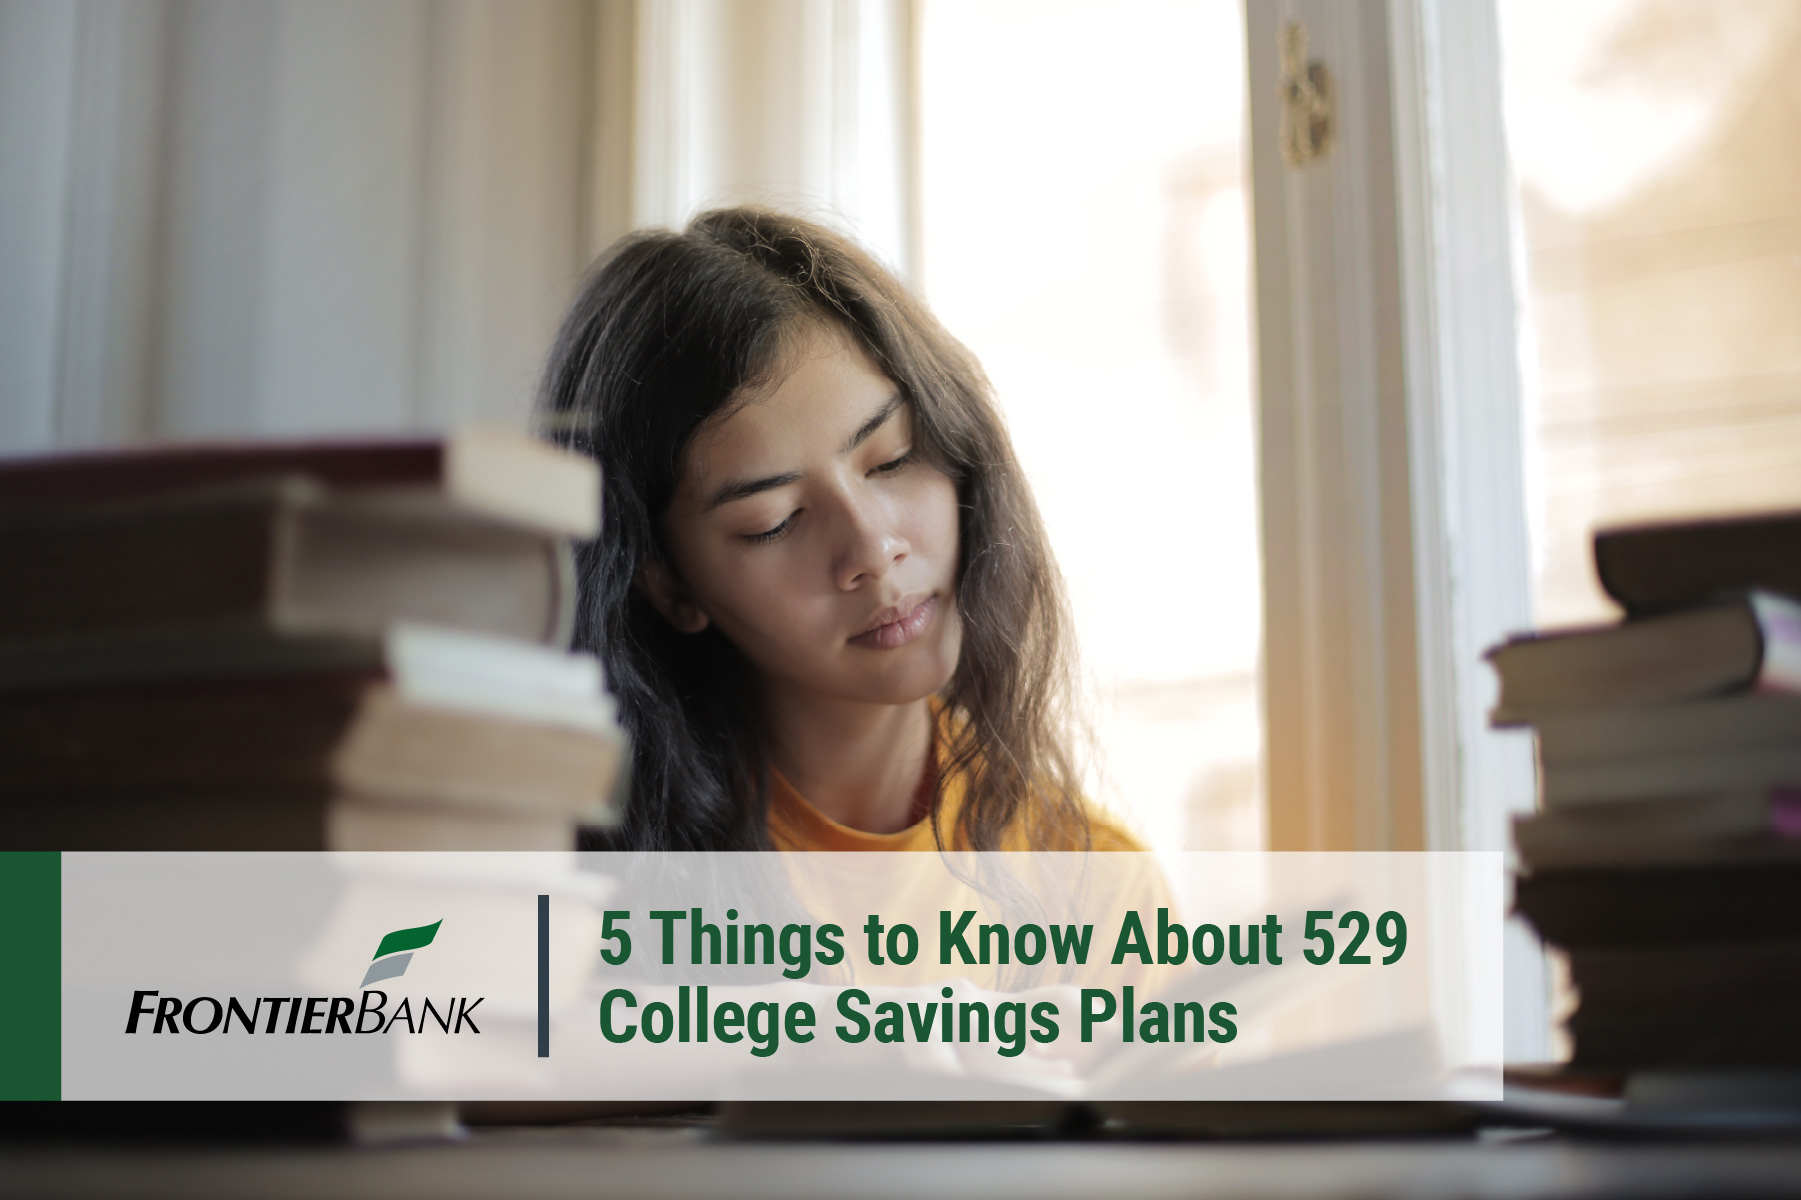 5 Things to Know About 529 College Savings Plans